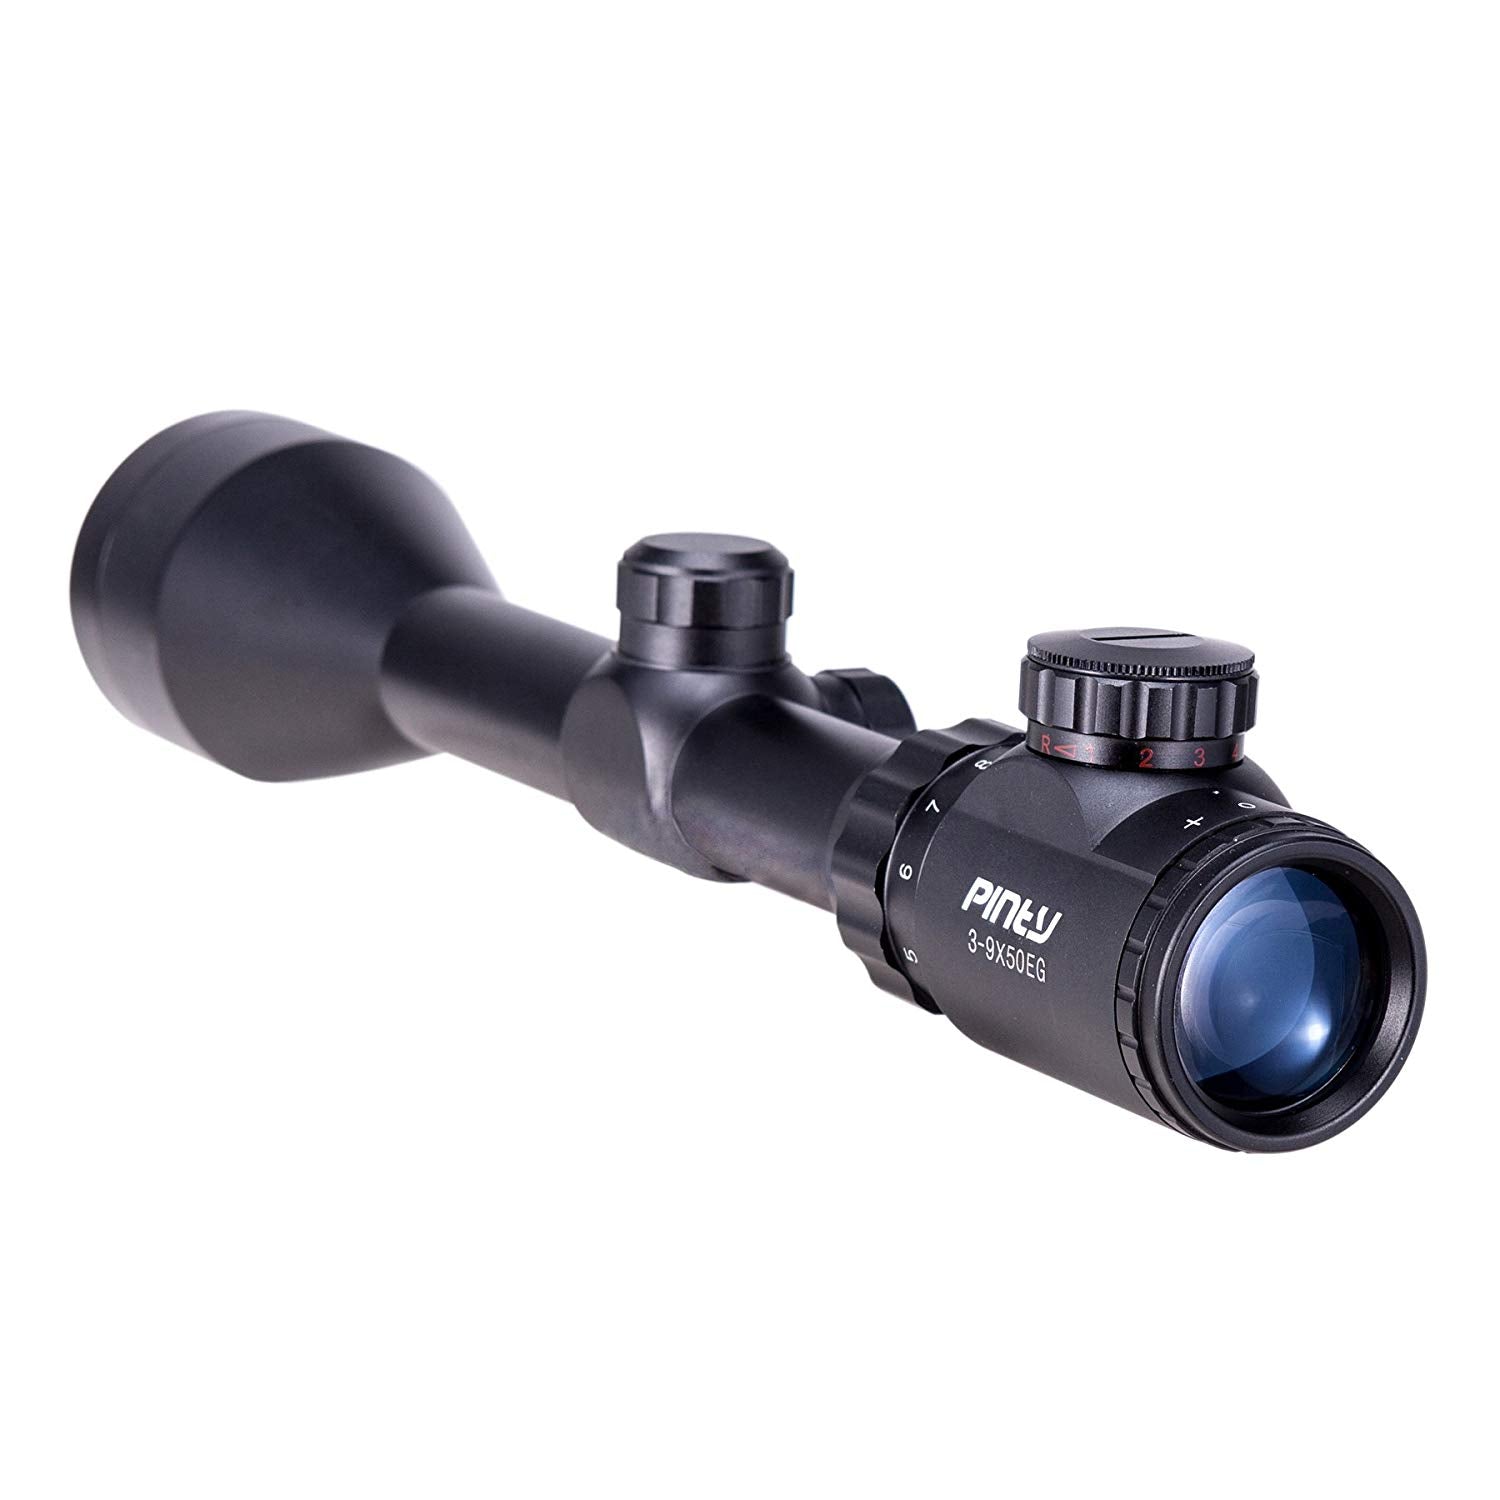 Pinty 3-9x50mm Red/Green Rangefinder Hunting Rifle Scope